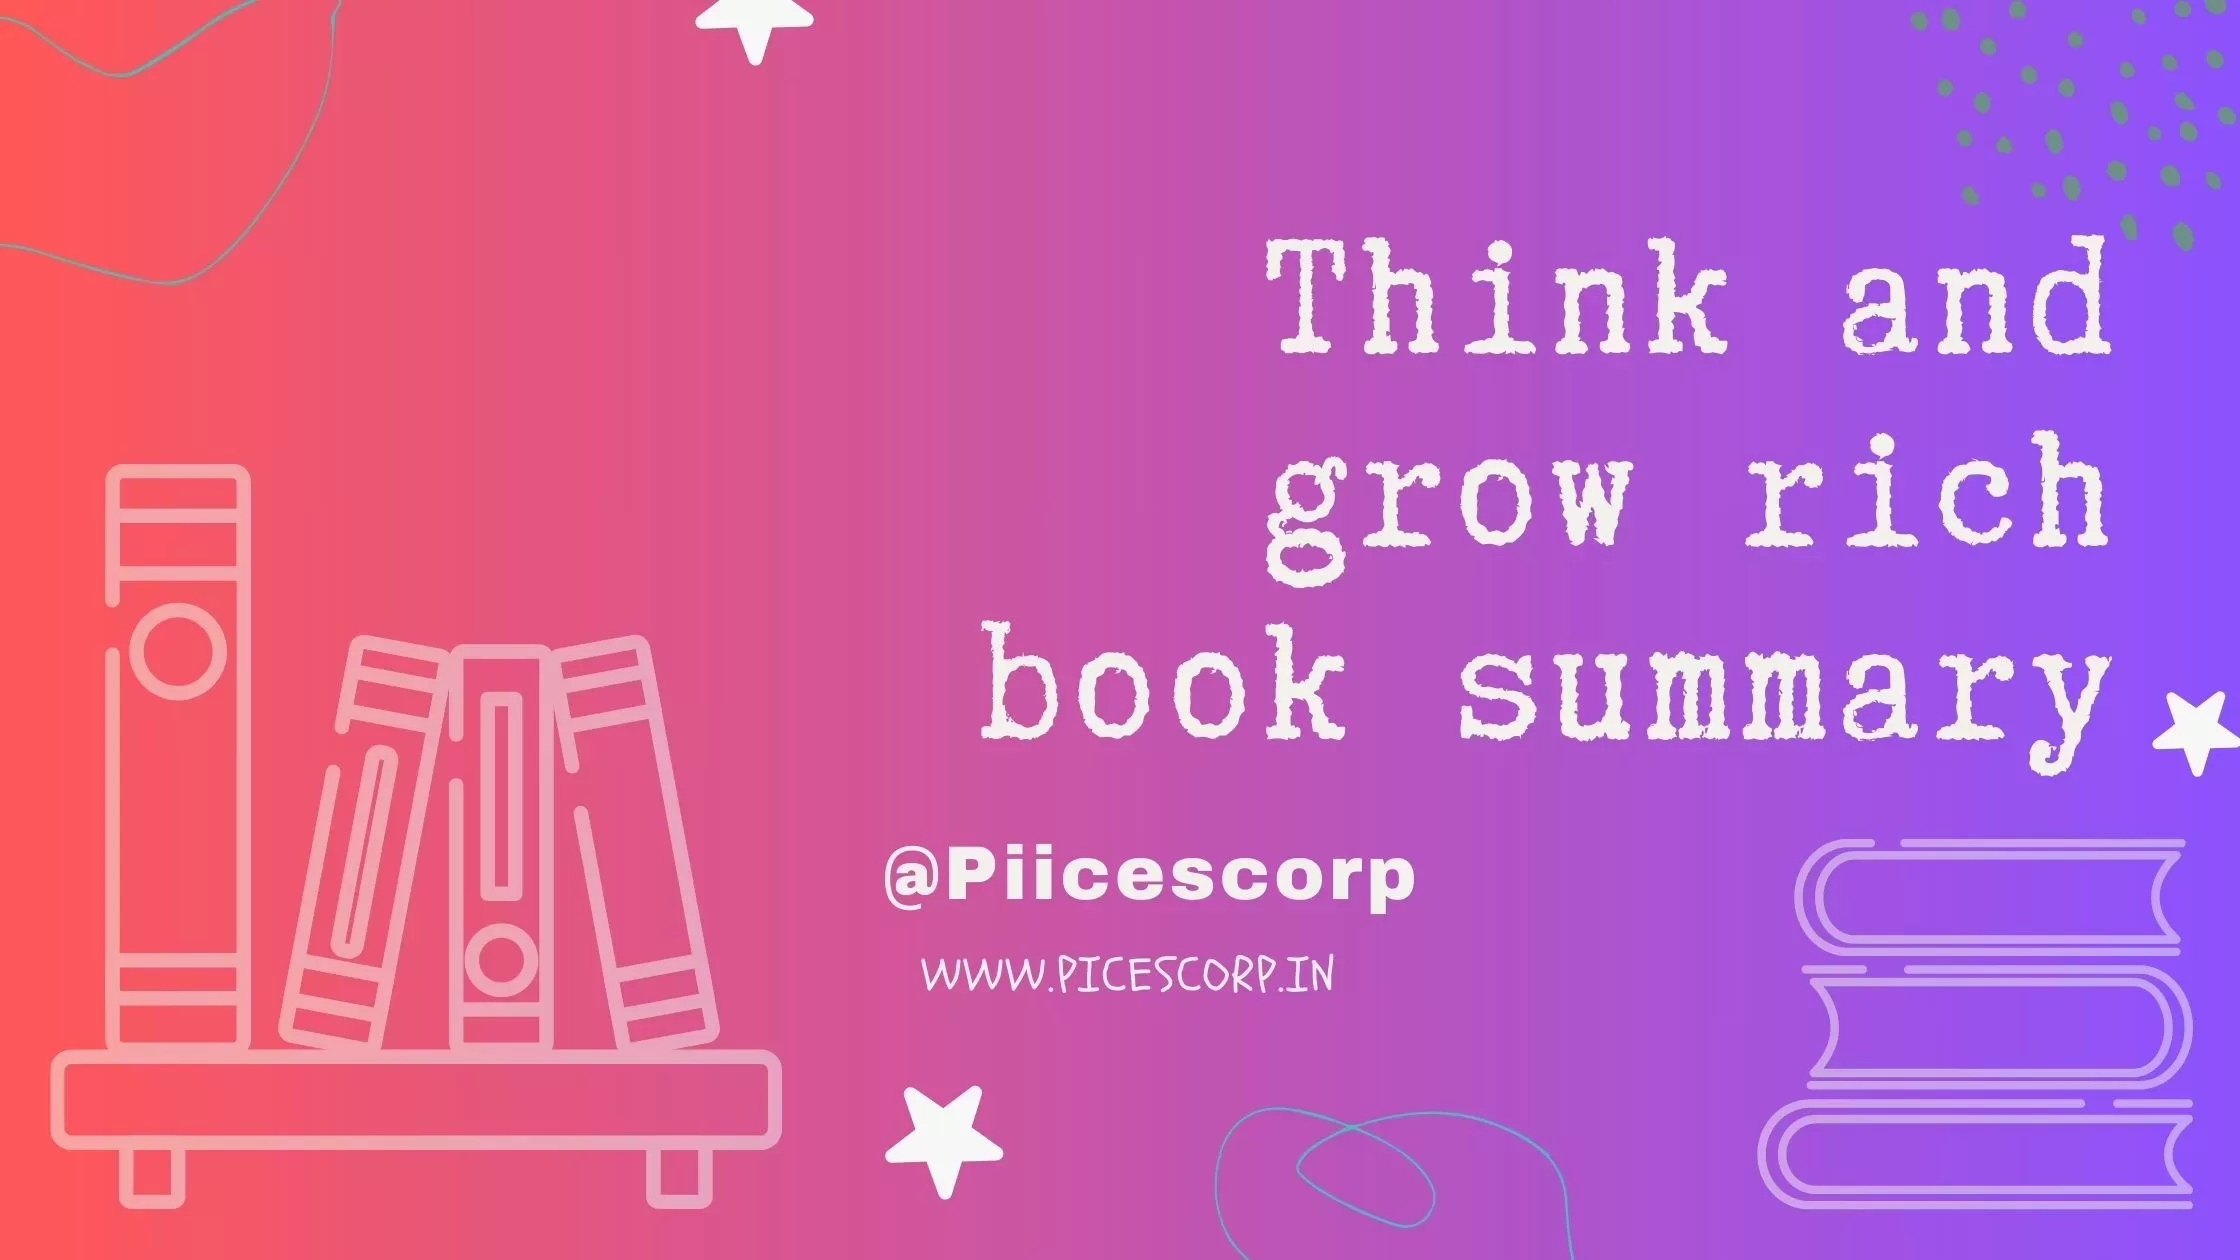 Think and grow rich book summary